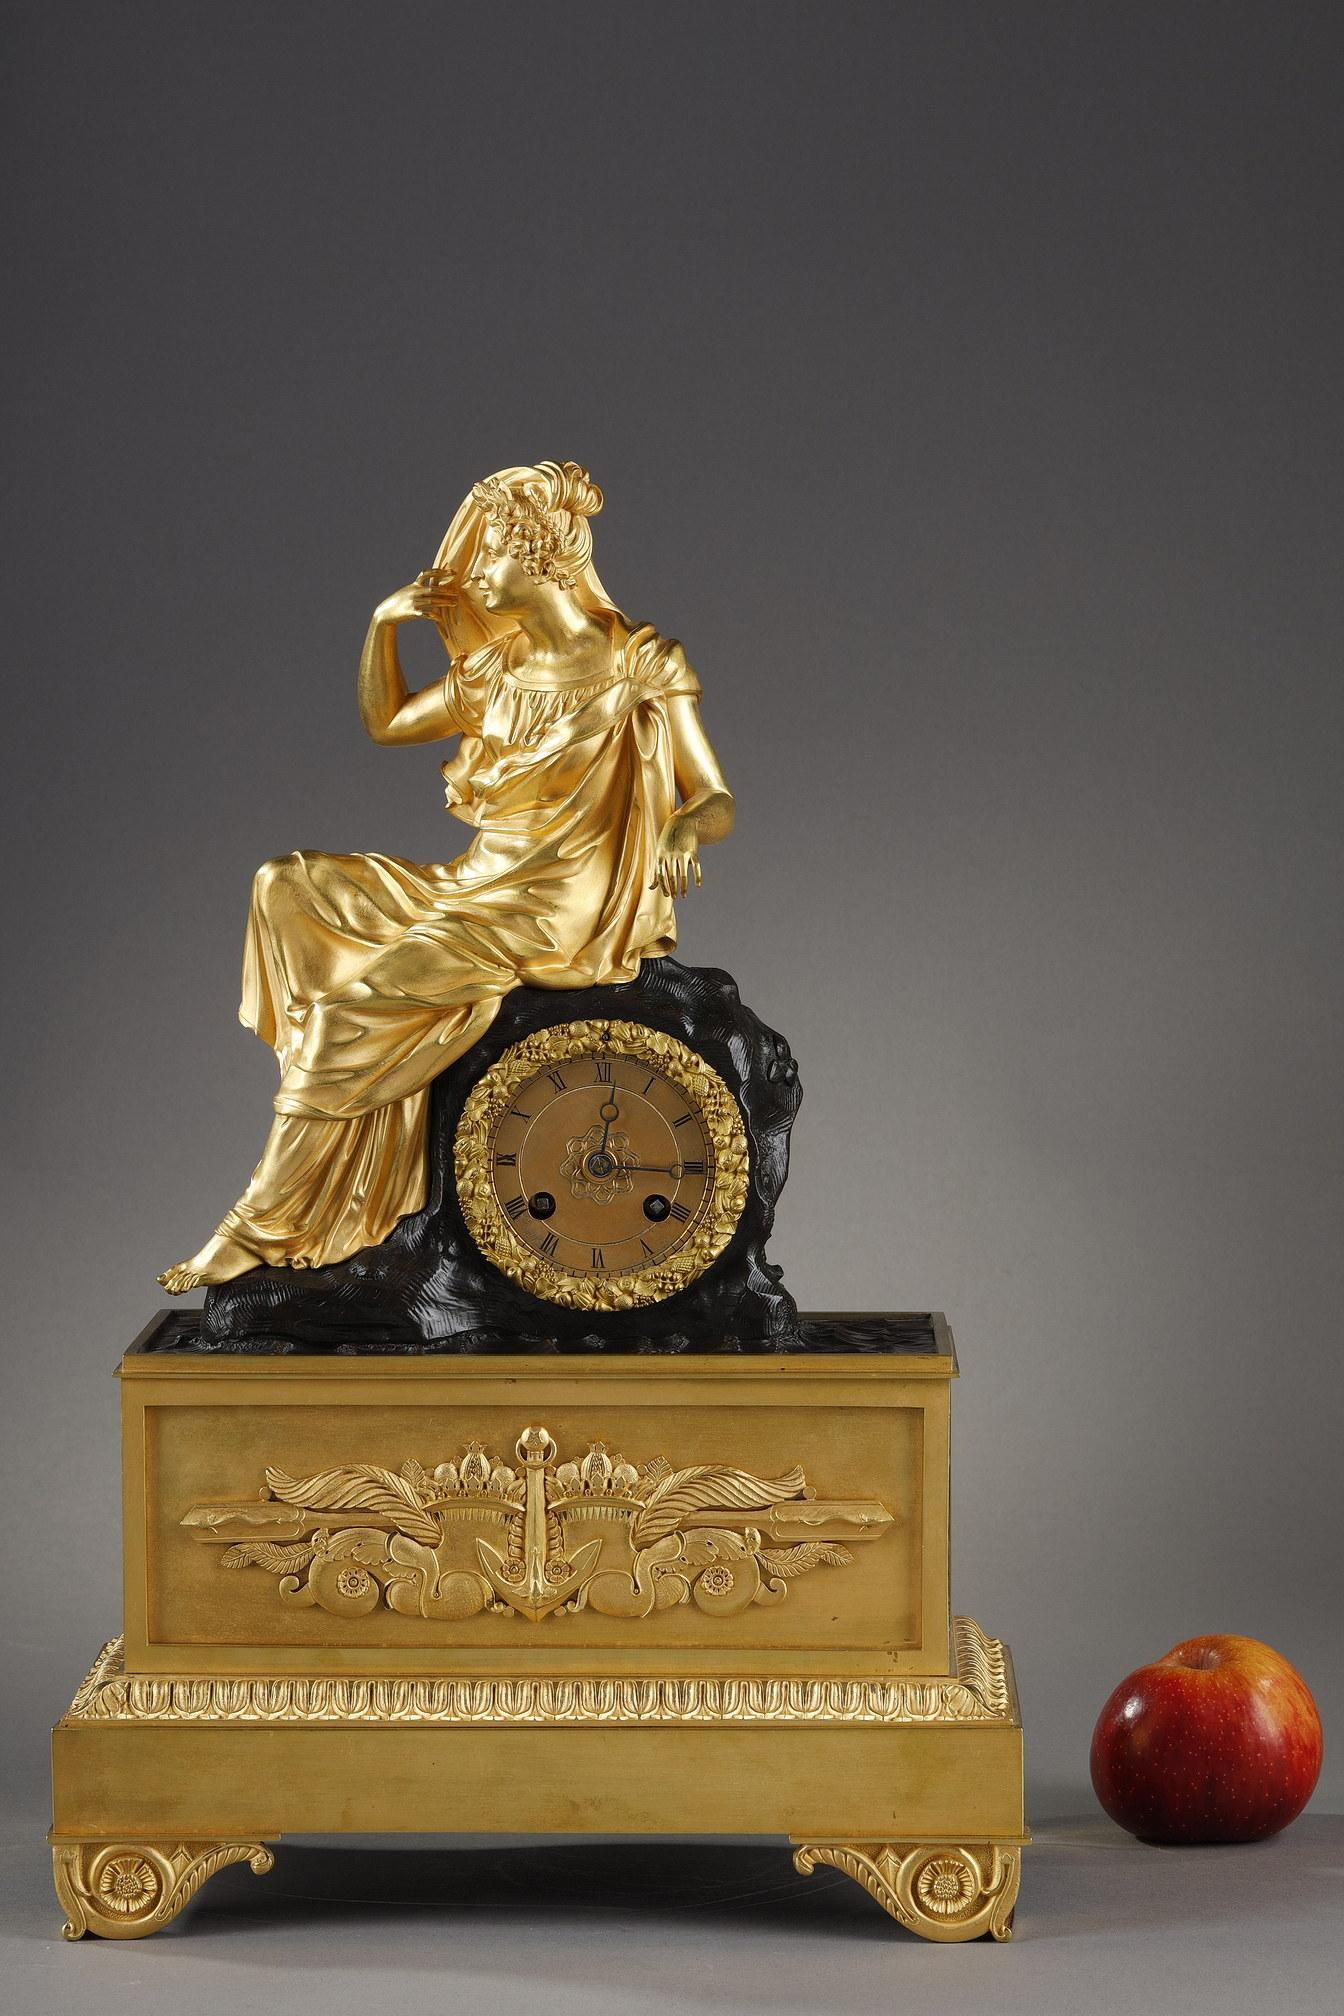 Clock in gilded and chiseled bronze representing a young woman sitting sideways dressed in the antique style, wearing a laurel crown and flowers, holding a veil above her head. She is seated on the dial set in a patinated bronze structure imitating